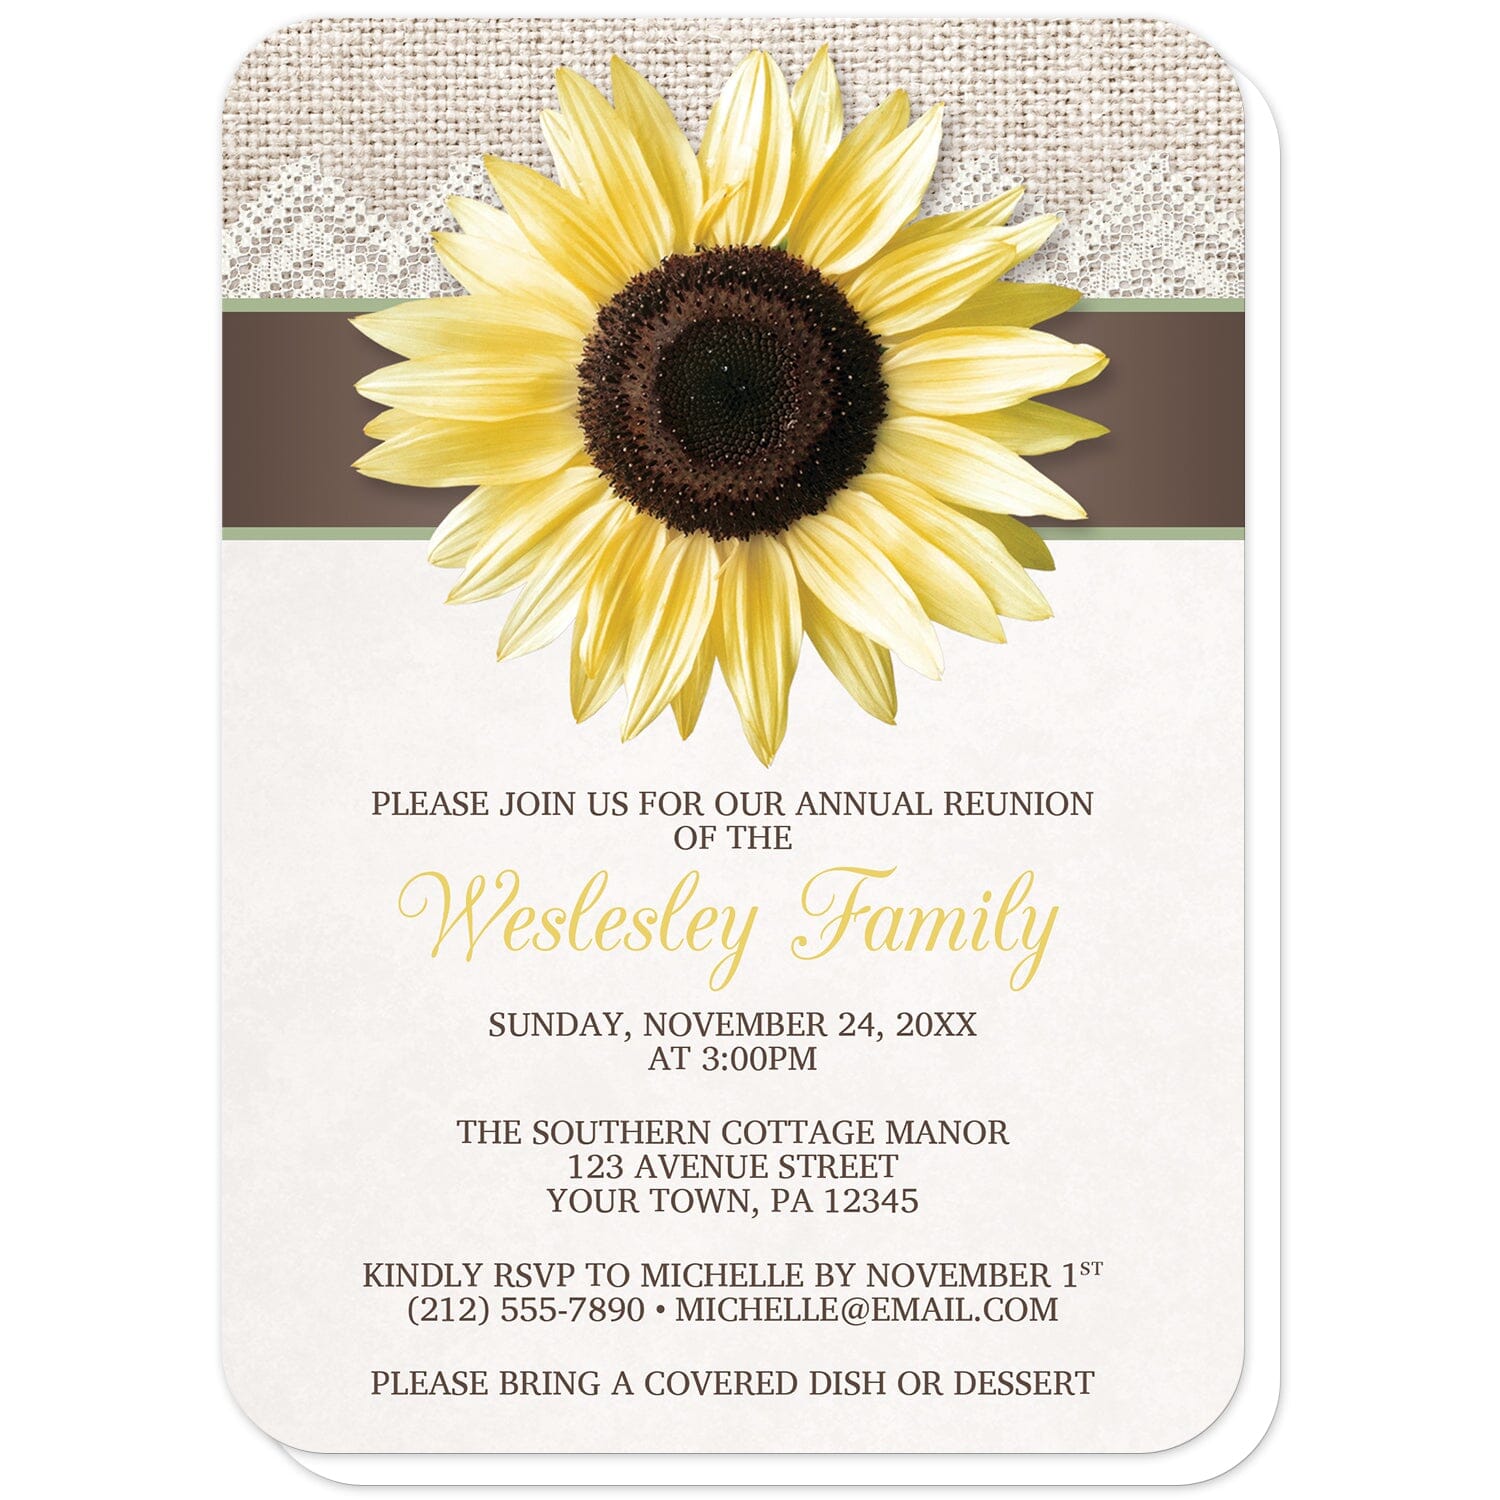 Burlap Lace Brown Sage Sunflower Family Reunion Invitations (with rounded corners) at Artistically Invited. Burlap lace brown sage sunflower family reunion invitations designed with a big yellow sunflower on a brown ribbon stripe with sage green edges and a rustic burlap and lace background illustration along the top of the invitations. Your personalized family reunion celebration details are custom printed in yellow and brown over a light beige background color below the sunflower design. 